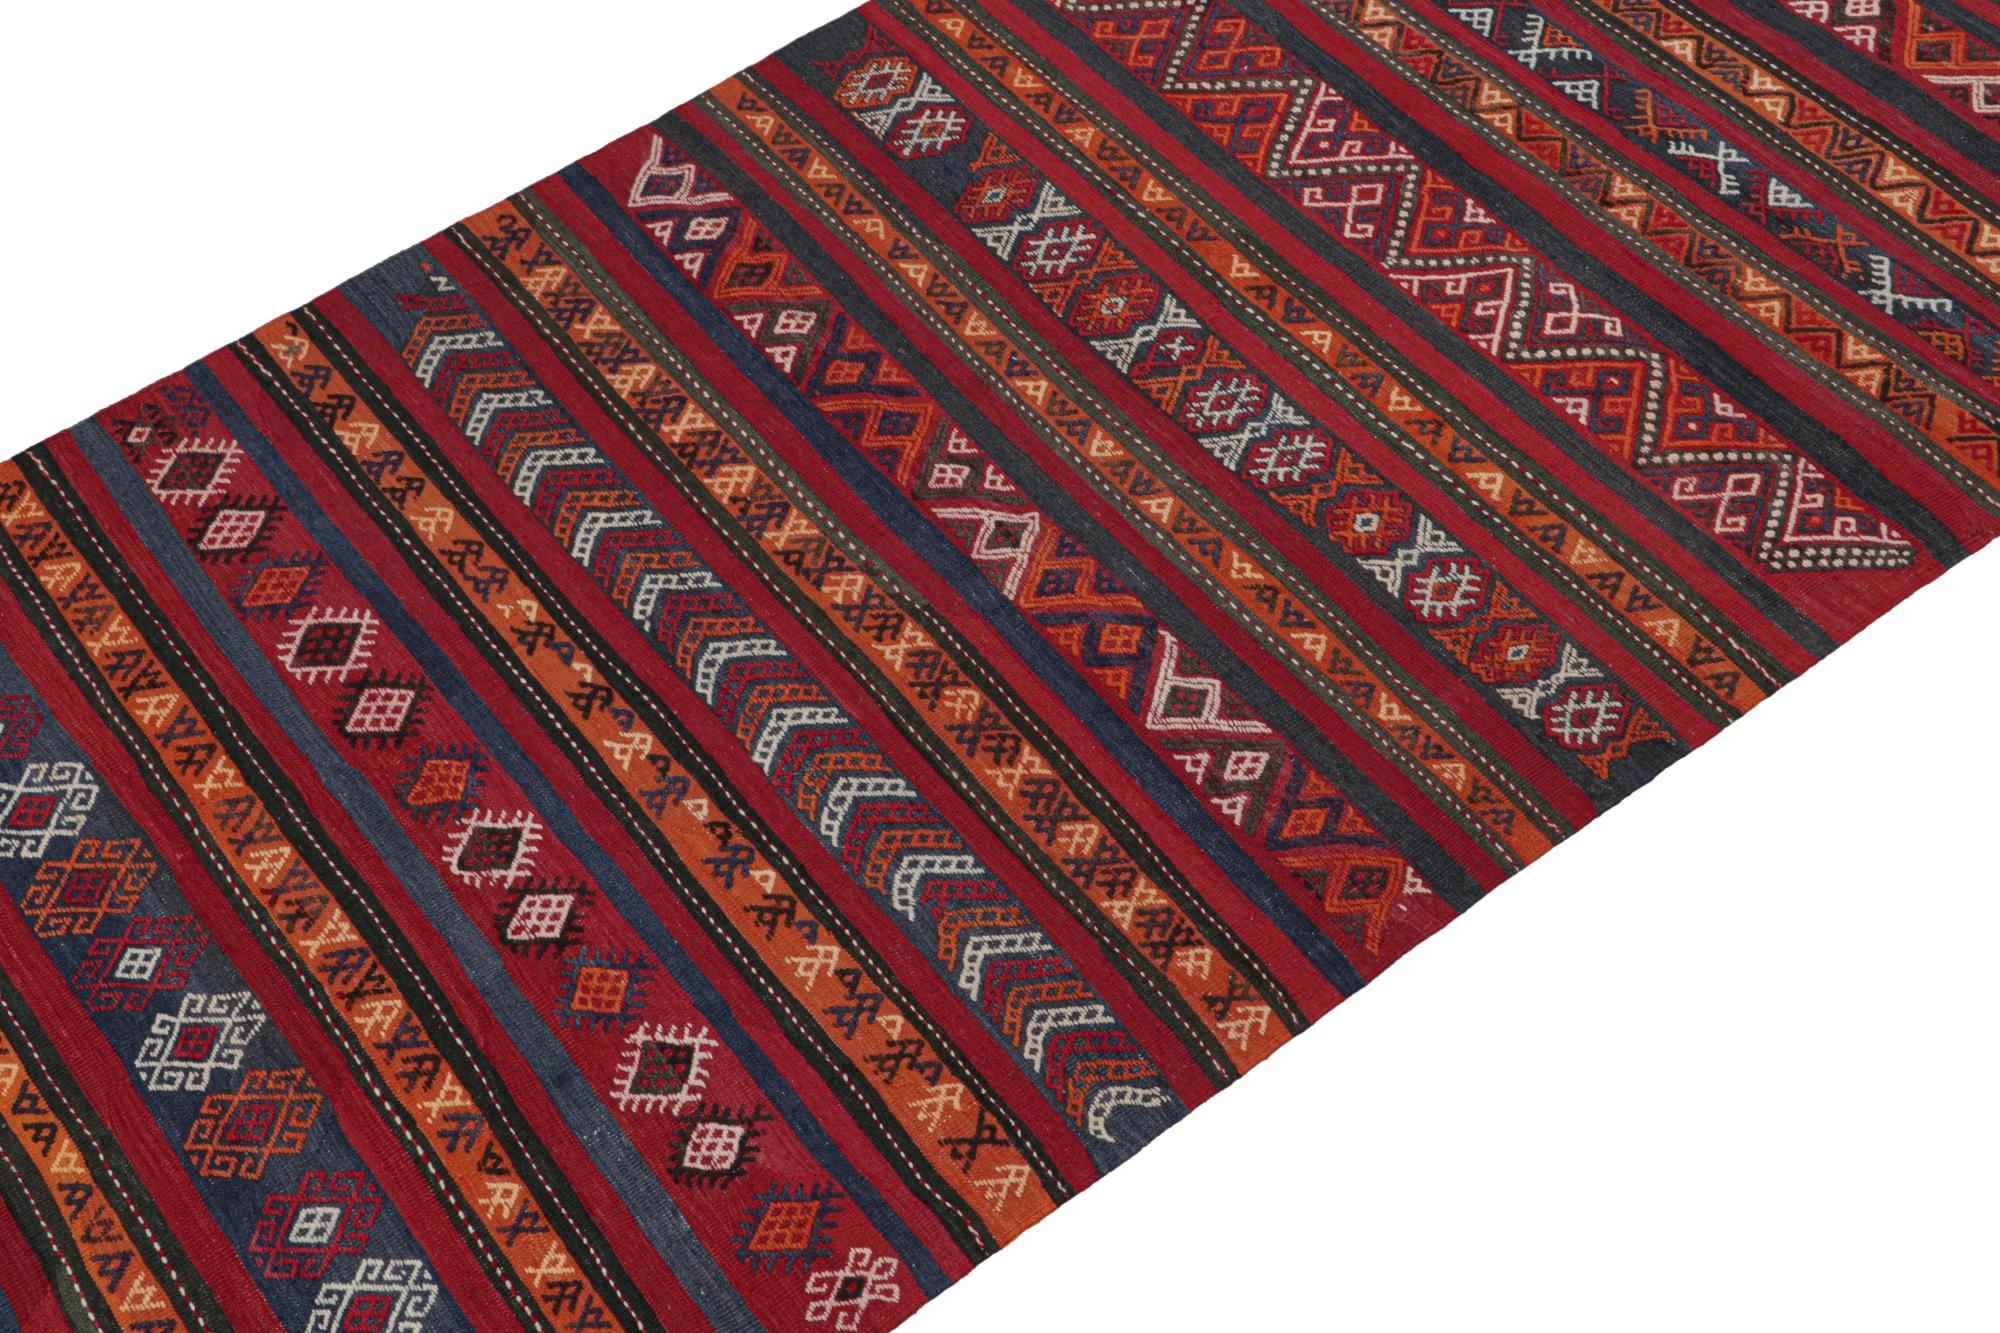 This vintage 5x14 Persian Kilim is a mid-century gallery runner and tribal rug believed to originate from the Shahsavan tribe. 

On the Design:

Handwoven in wool circa 1950-1960, its design enjoys an all over pattern of stripes and colorful